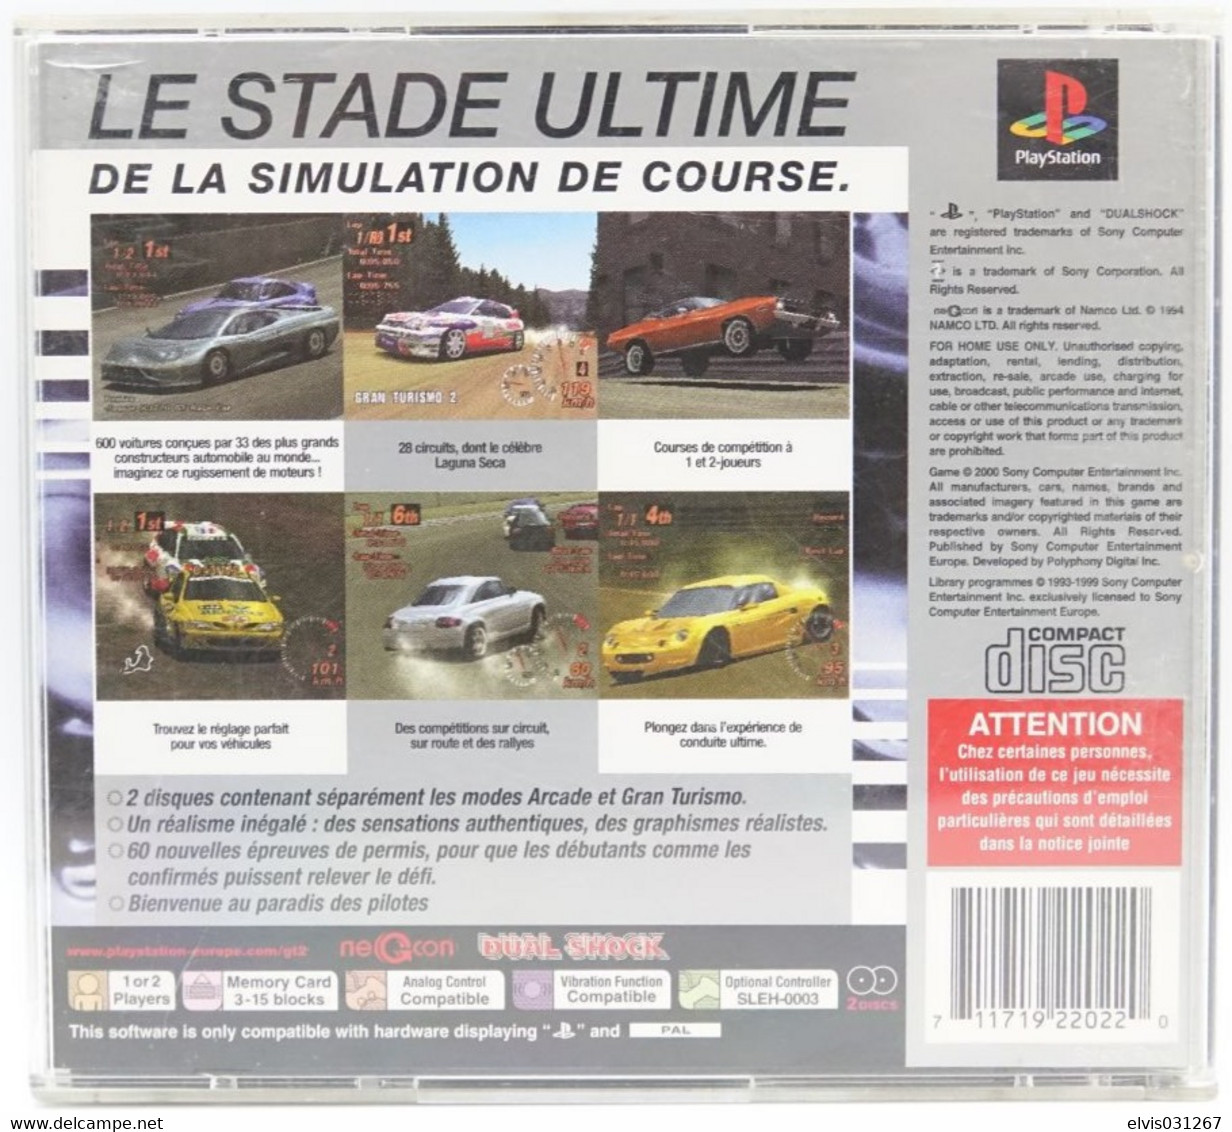 SONY PLAYSTATION ONE PS1 : GRAN TURISMO 2 THE REAL DRIVING SIMULATOR - PLATINUM - Playstation